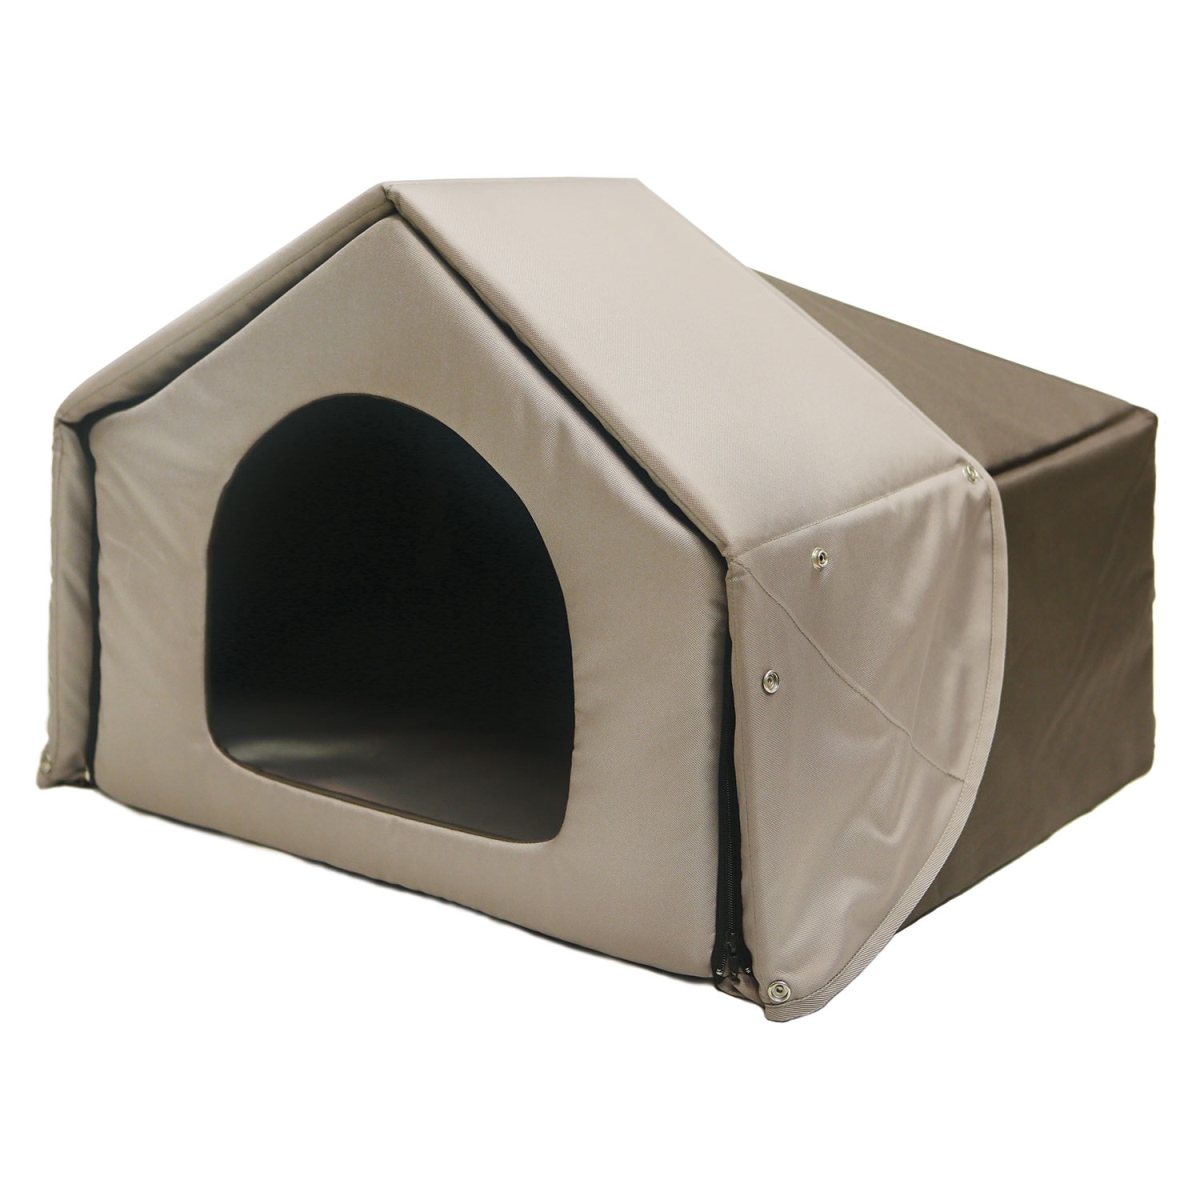 R94701 Convertible Pet Bed House, Brown